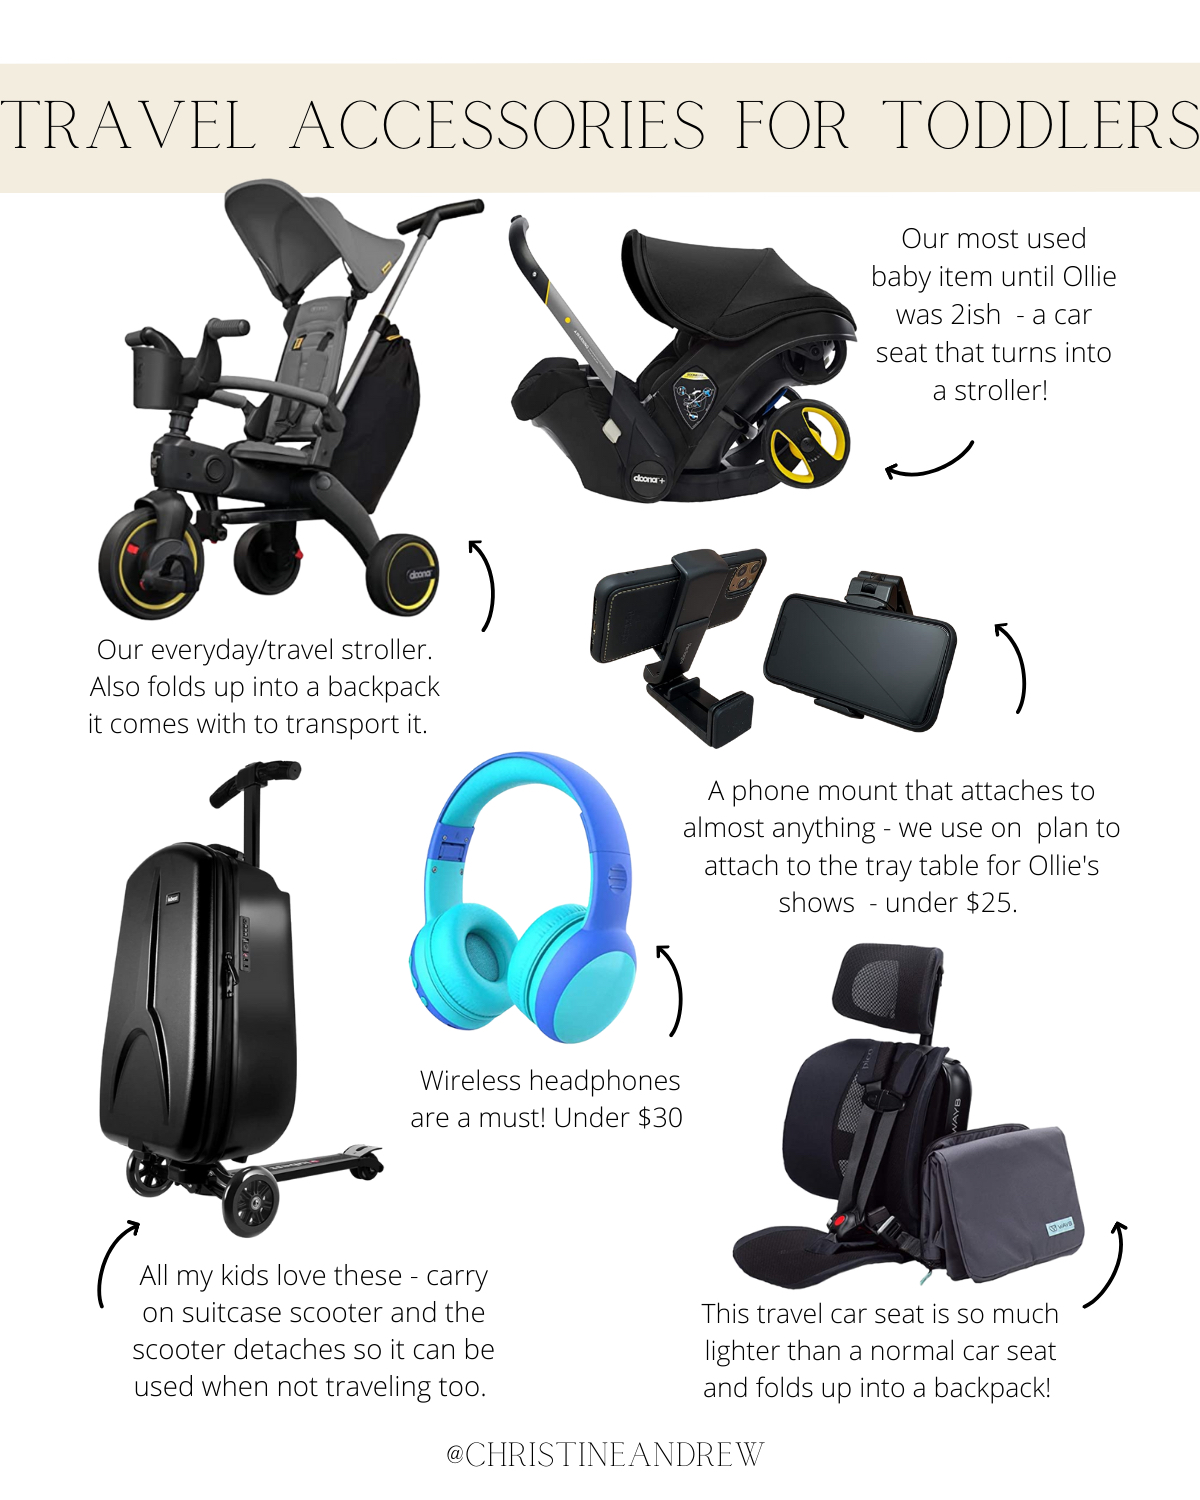 travel accessories, Doona stroller trike, travel car seats, traveling with toddler, toddler travel hacks, travel essentials, traveling with kids